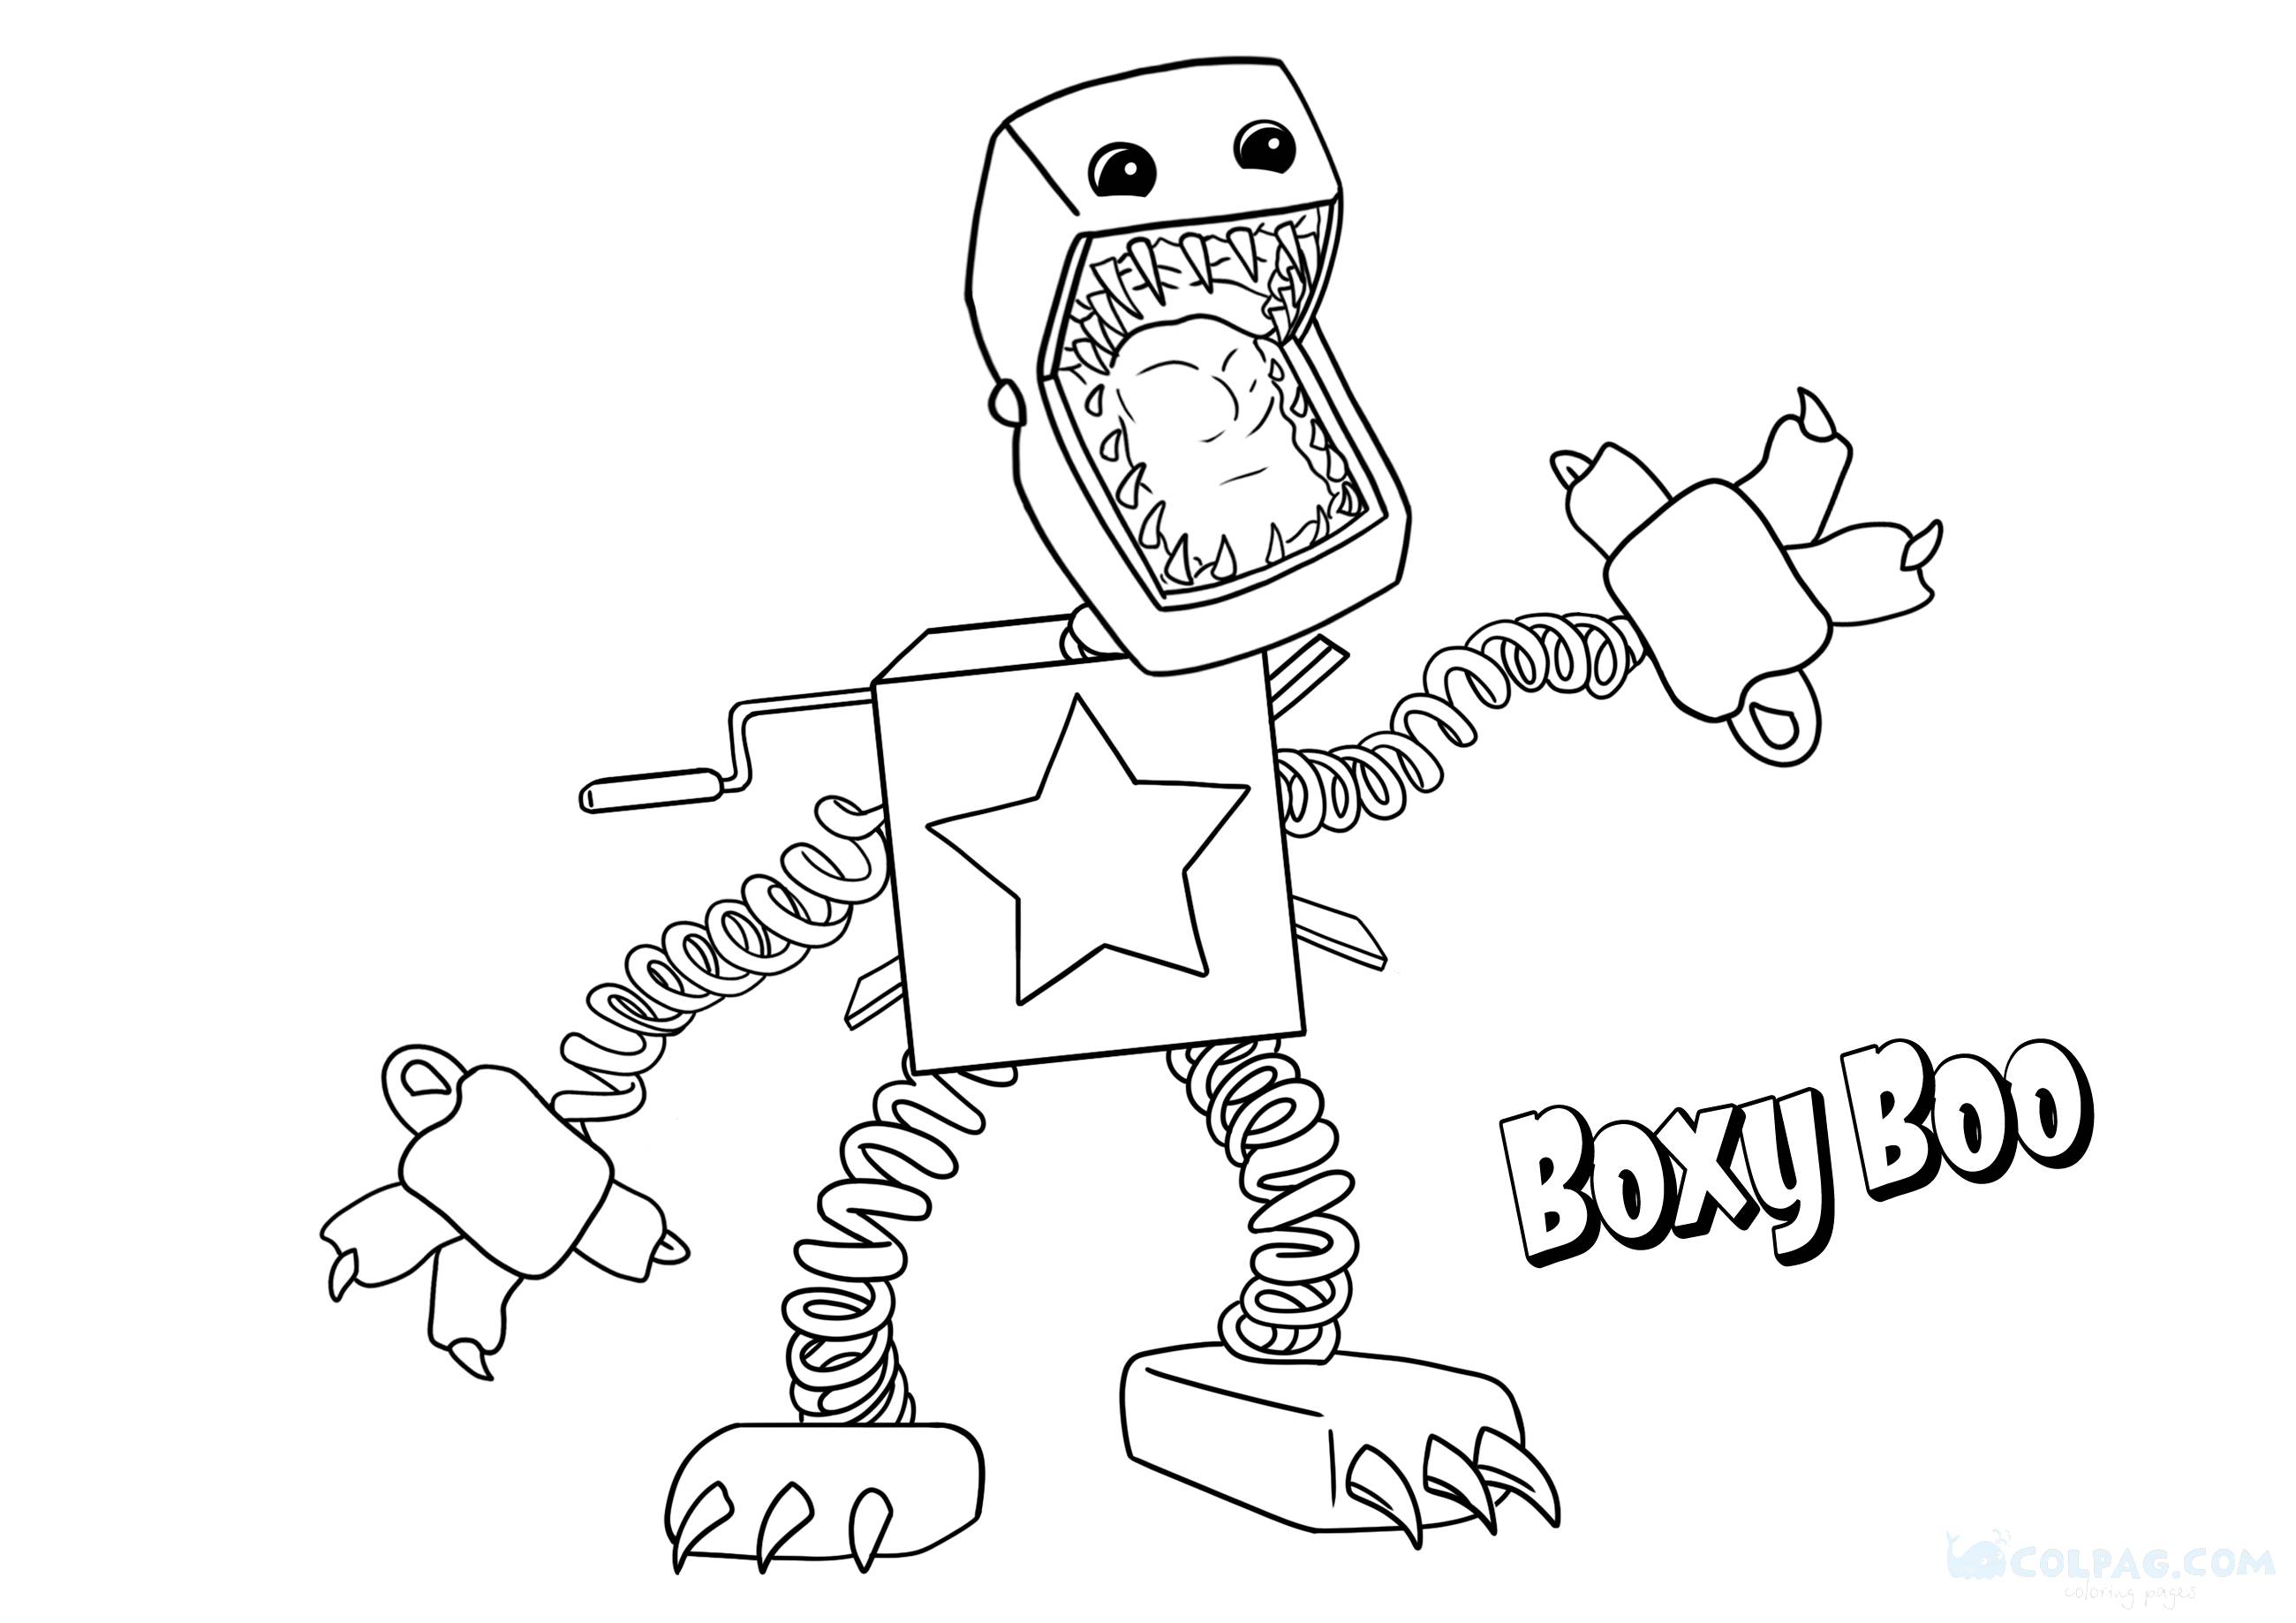 boxy-boo-project-playtime-coloring-page-colpag-com-19